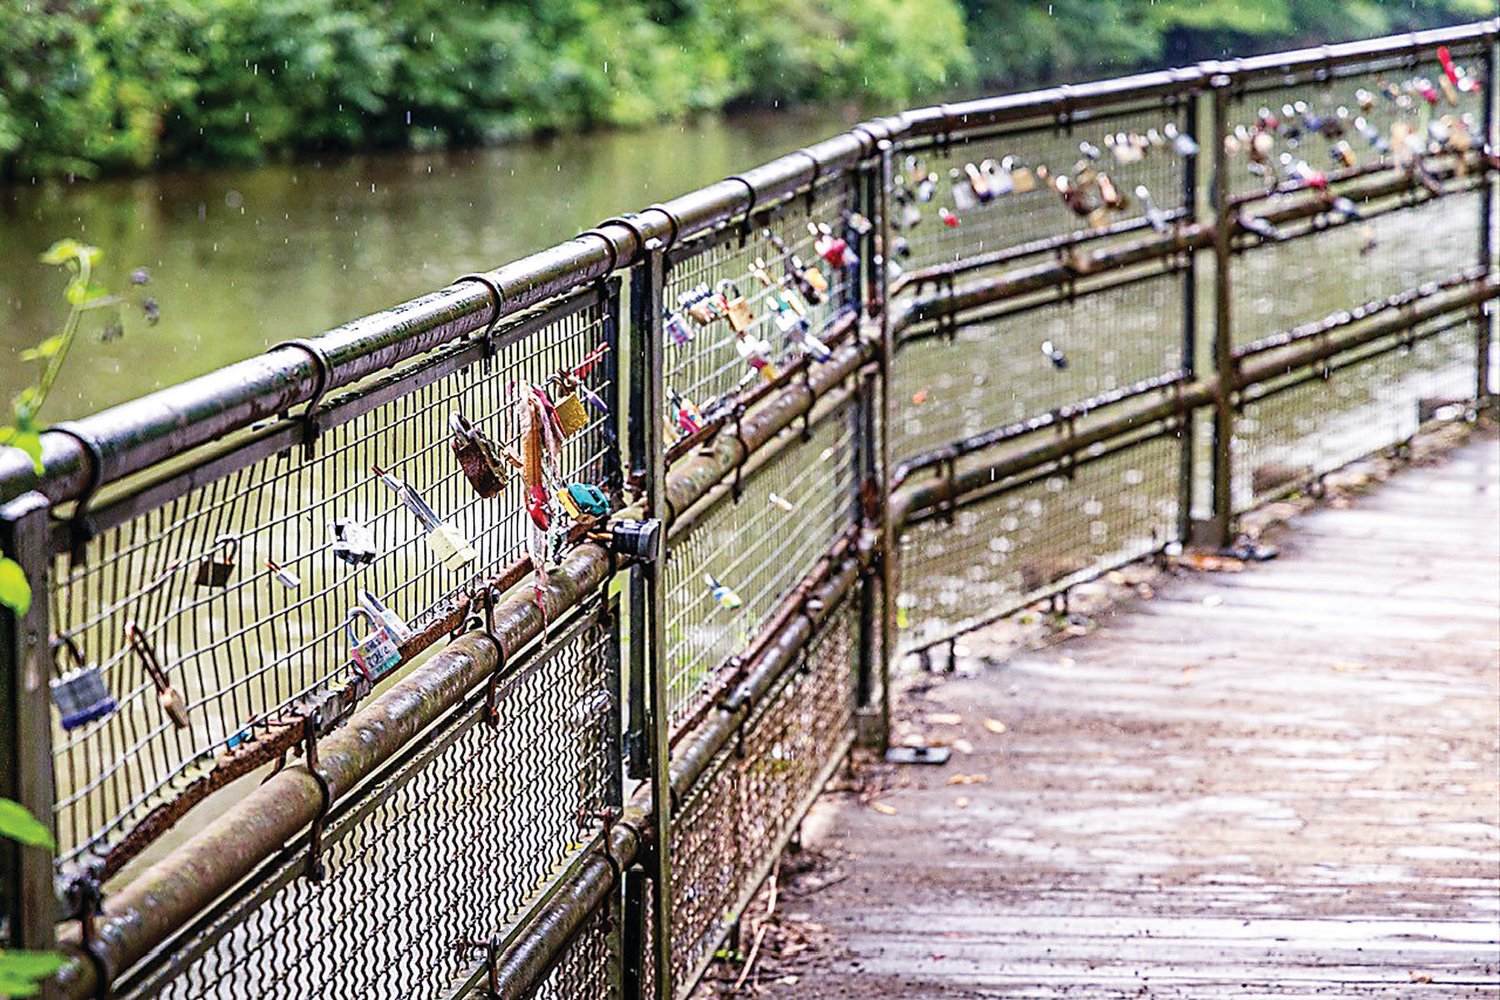 Locks fill the railing of the canal towpath bridge in Lambertville.